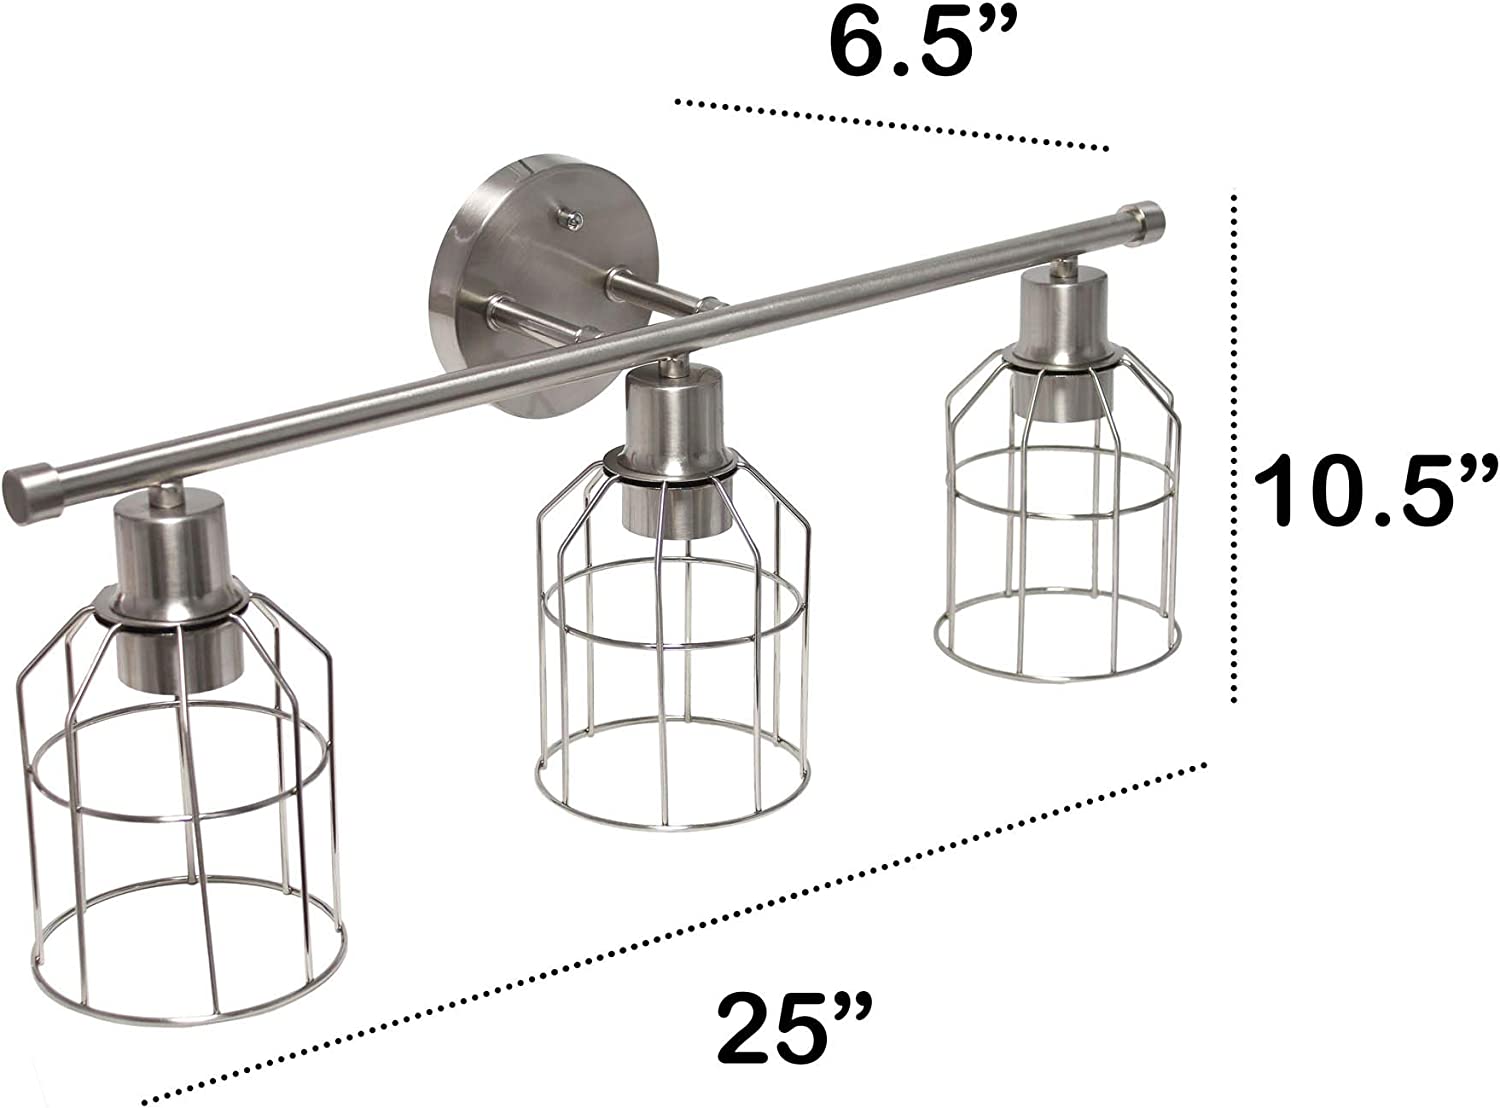 Lalia Home Industrial Bathroom Vanity Light with Open Wire Cage Shade in Brushed Nickel Finish